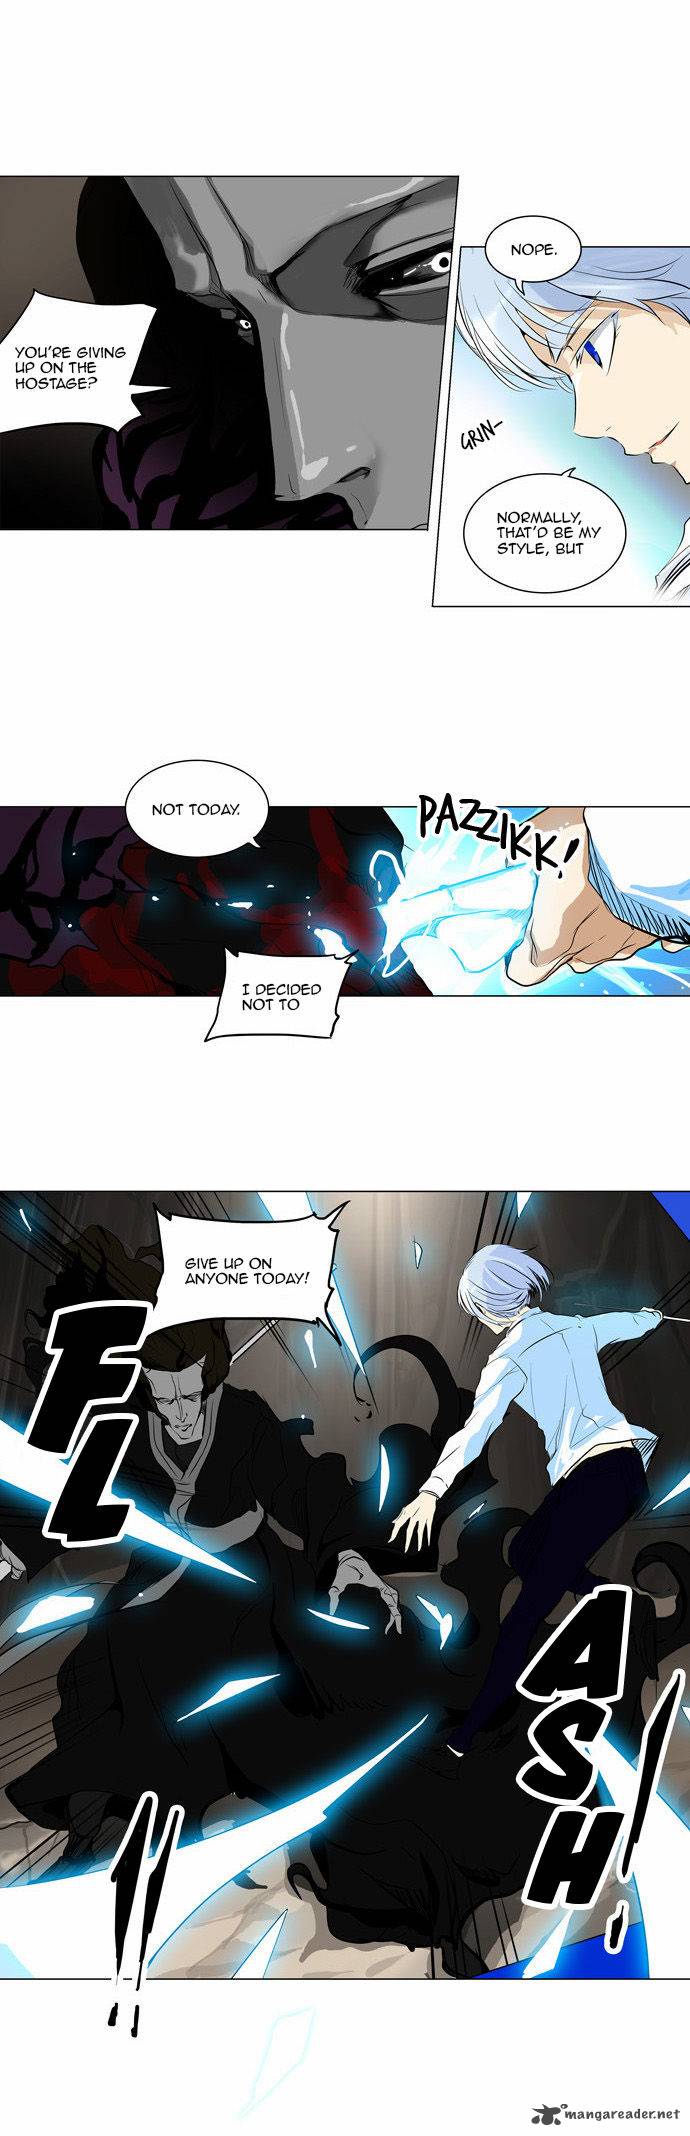 Tower Of God 103 3